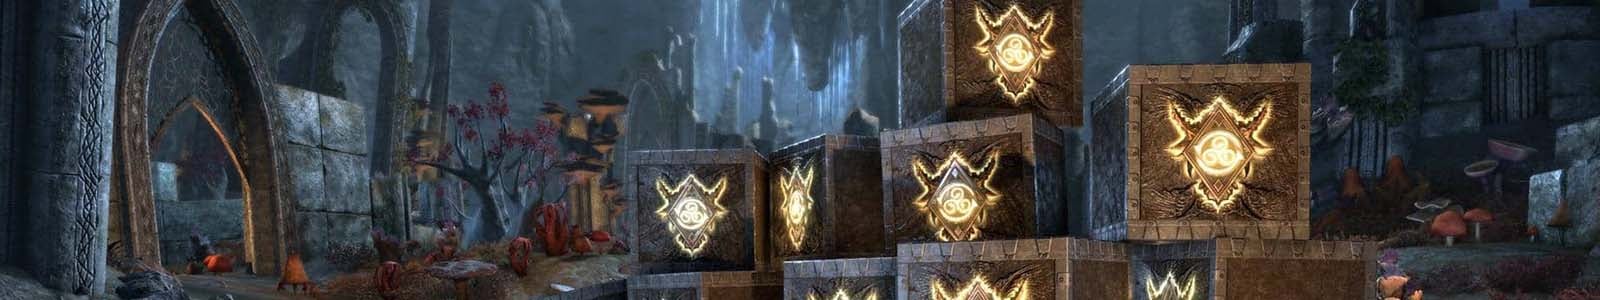 New Moon Crate - ESO header